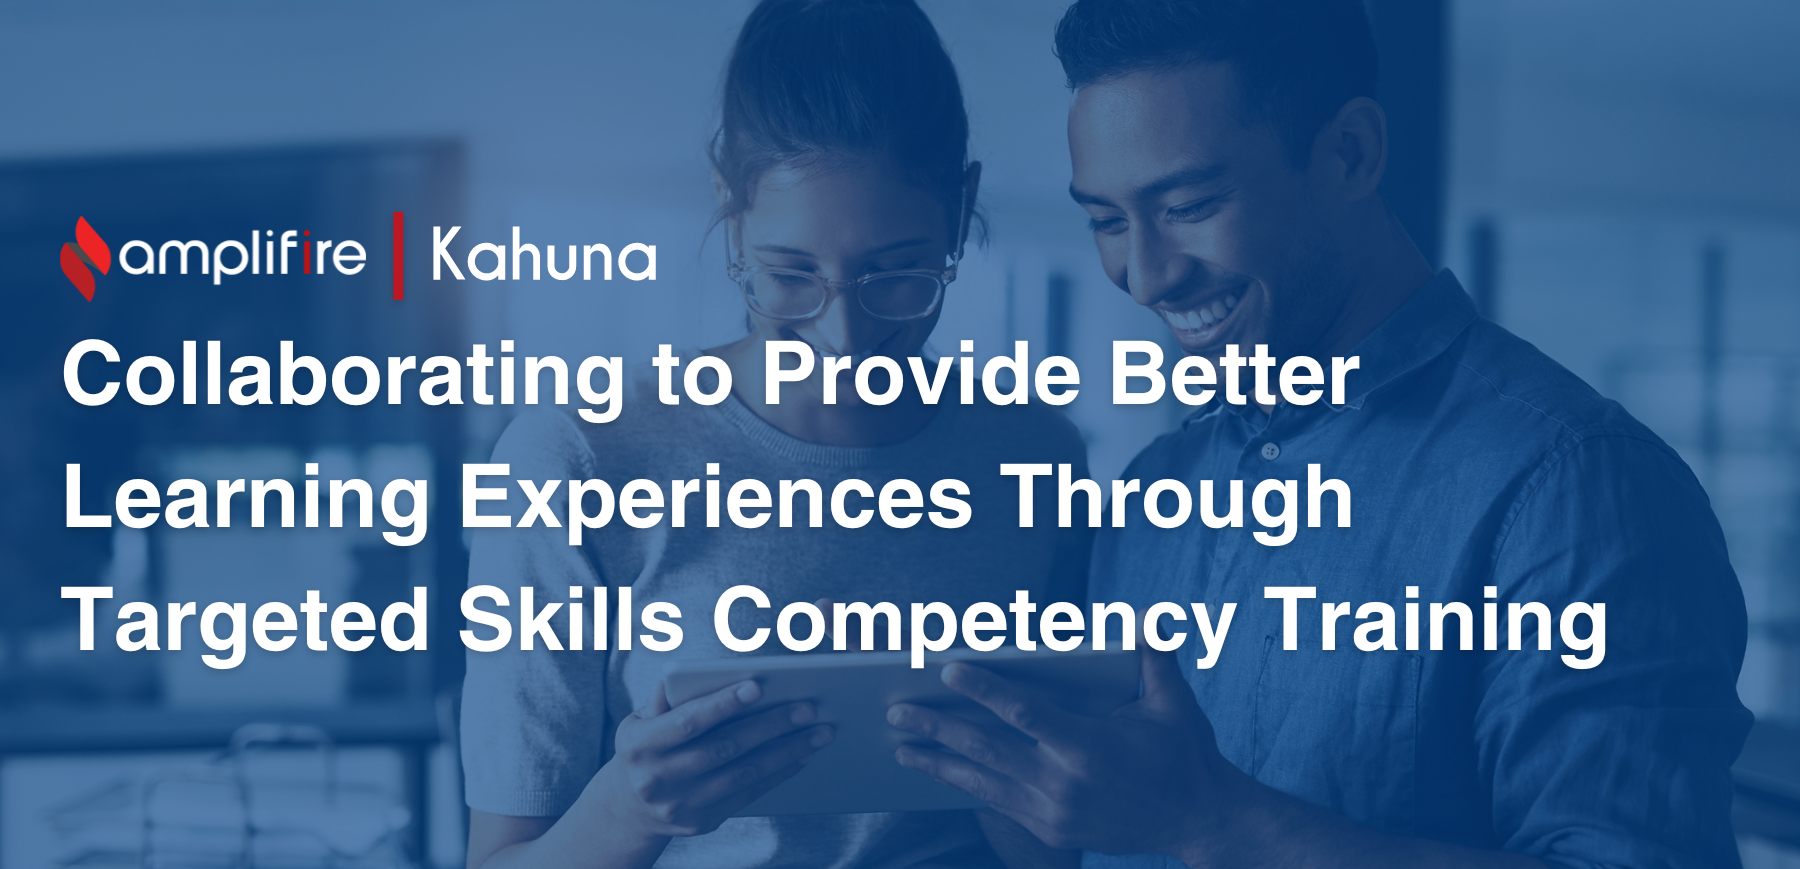 Jointly, Amplifire and Kahuna reduce the administrative burden associated with tracking requirements, eliminate redundancies and time wasted by respecting learners’ expertise, and ensure individuals are empowered with the right skills to give themselves and the business a competitive edge.